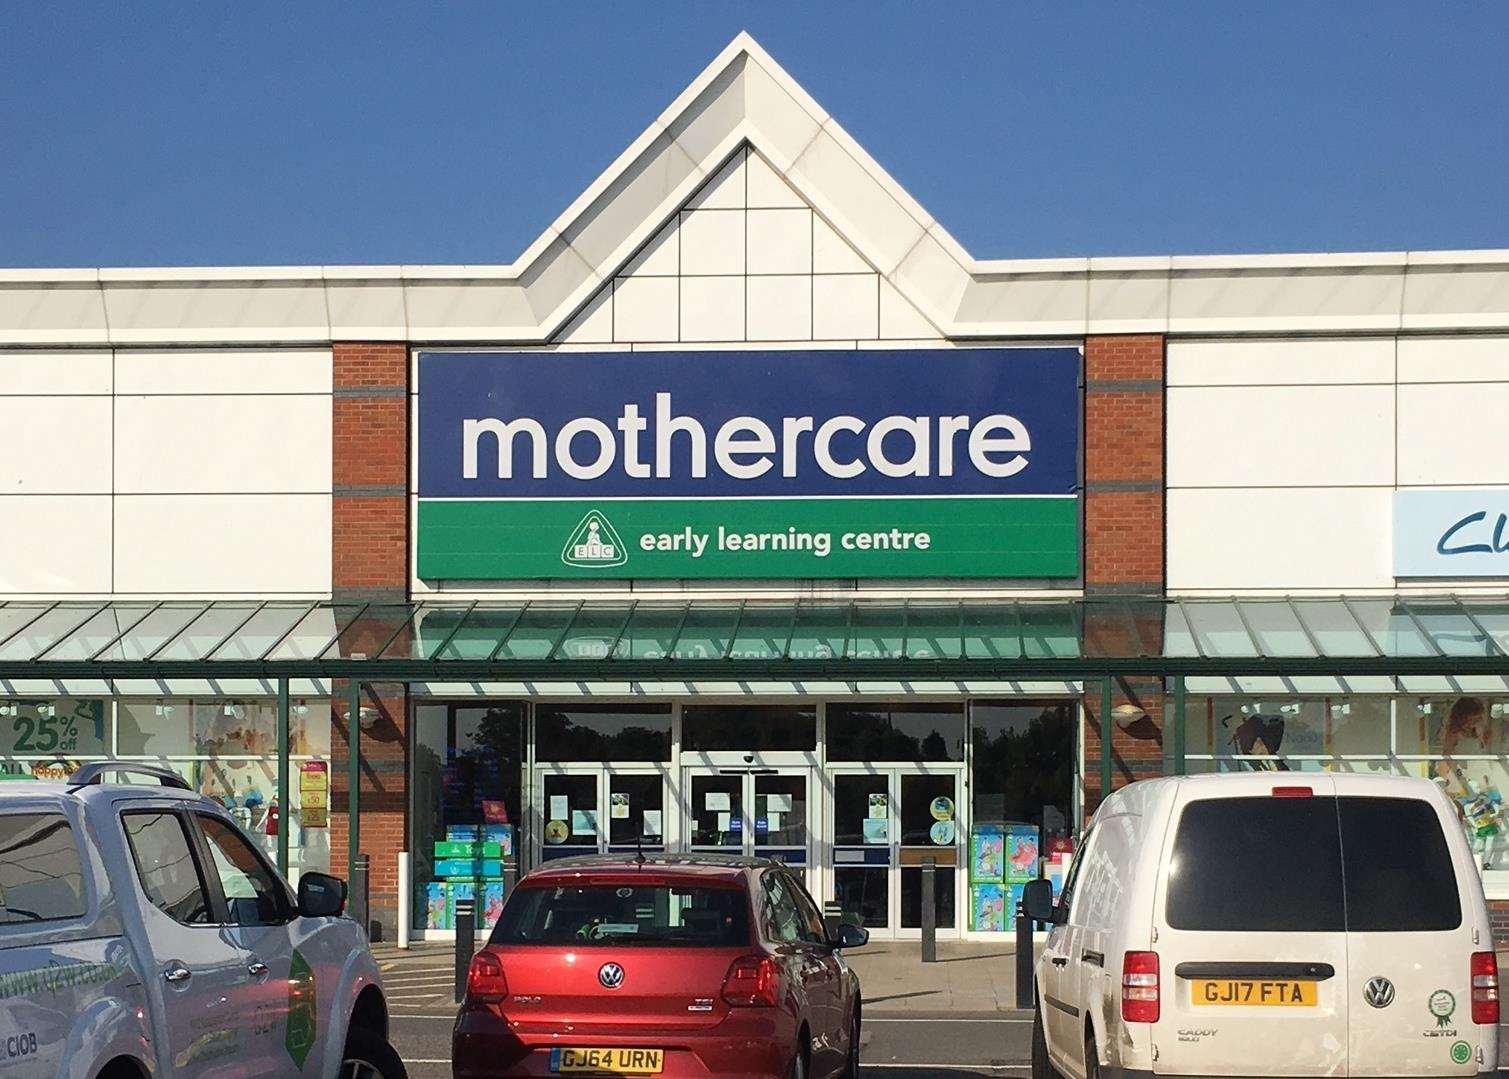 Mothercare in Canterbury is one of 77 stores that will stay open